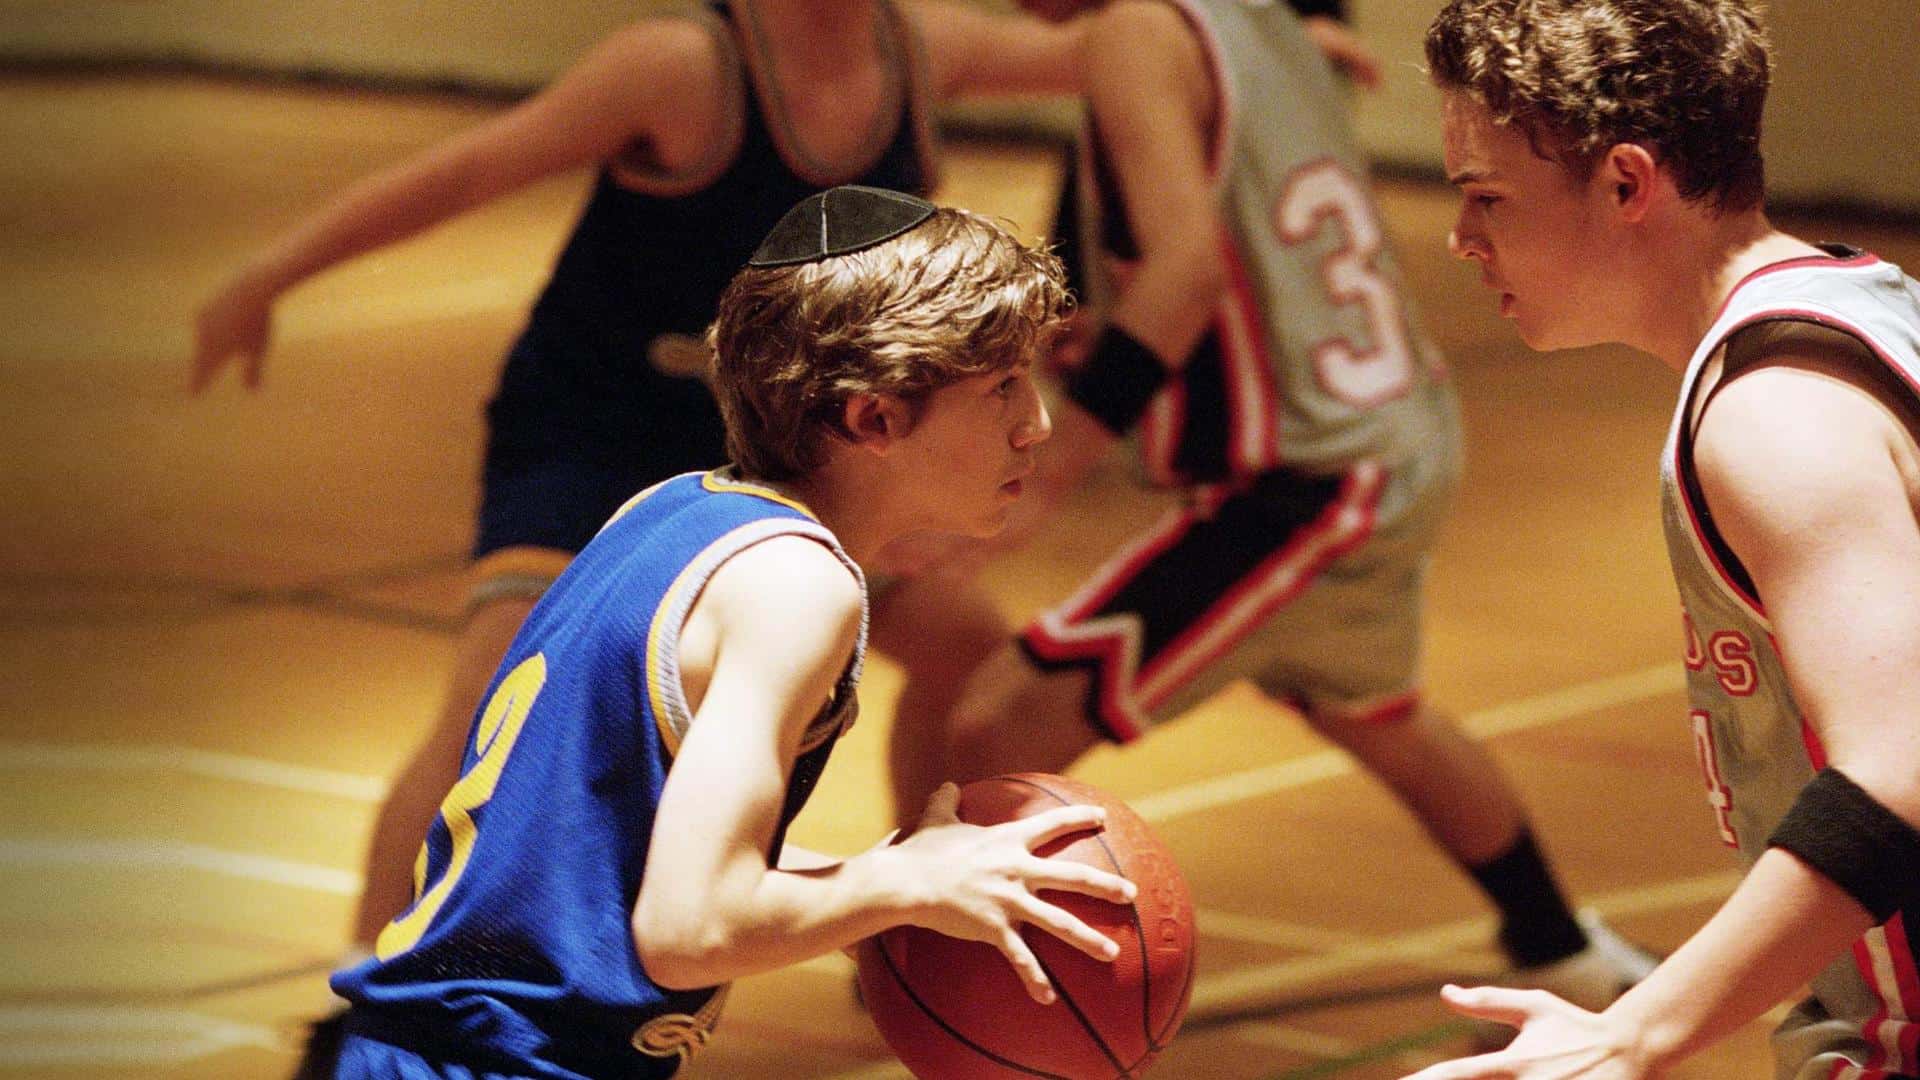 A teen plays basketball while wearing a kippah in this photo from Daniel L. Paulson Productions.